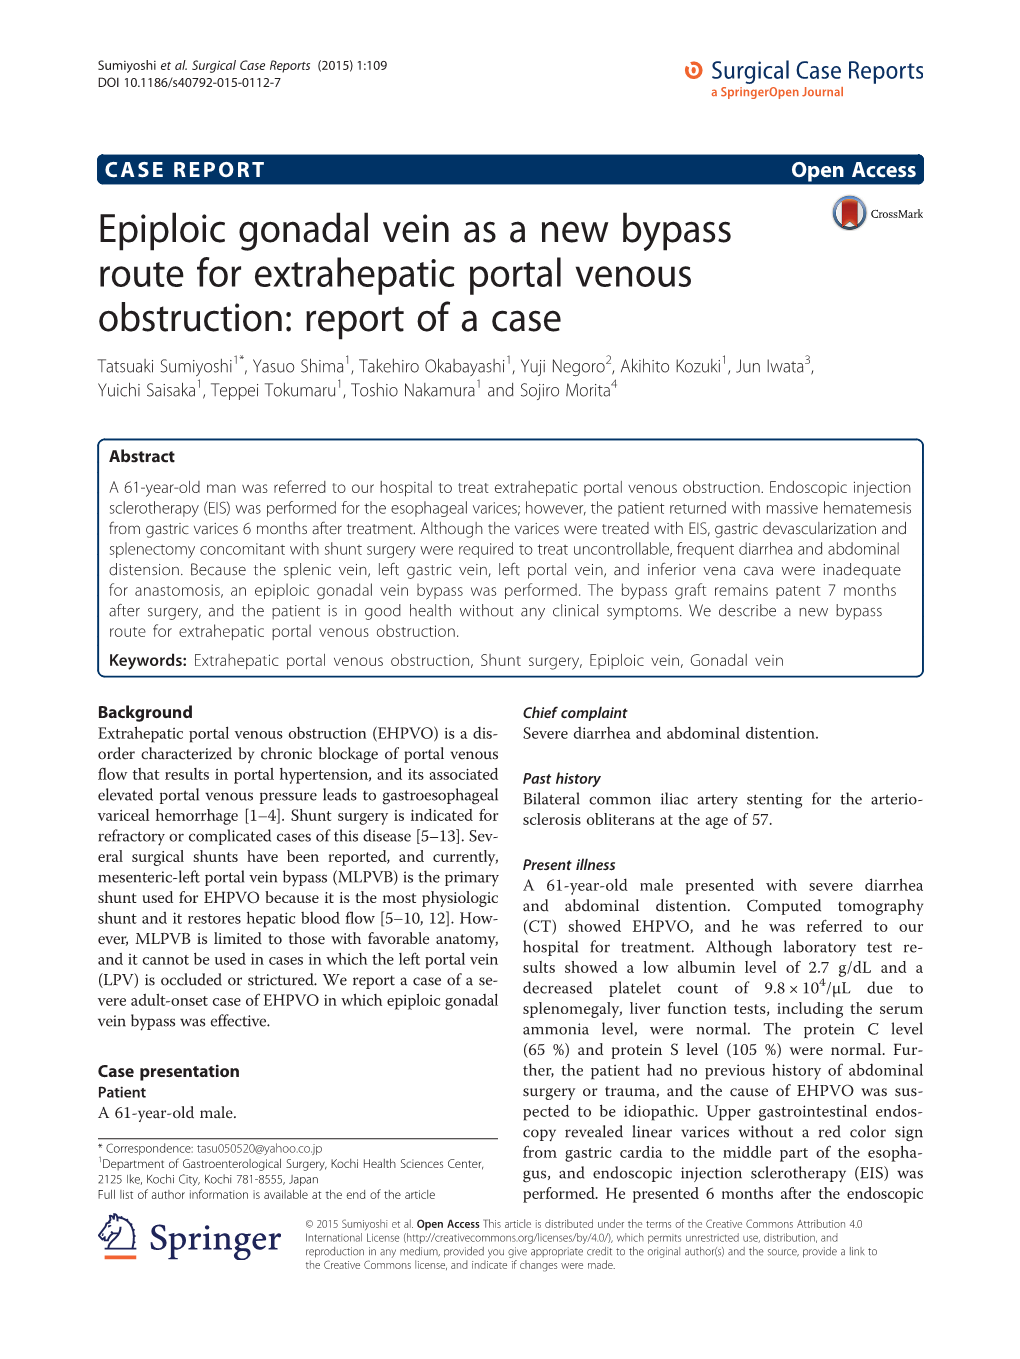 Epiploic Gonadal Vein As a New Bypass Route for Extrahepatic Portal